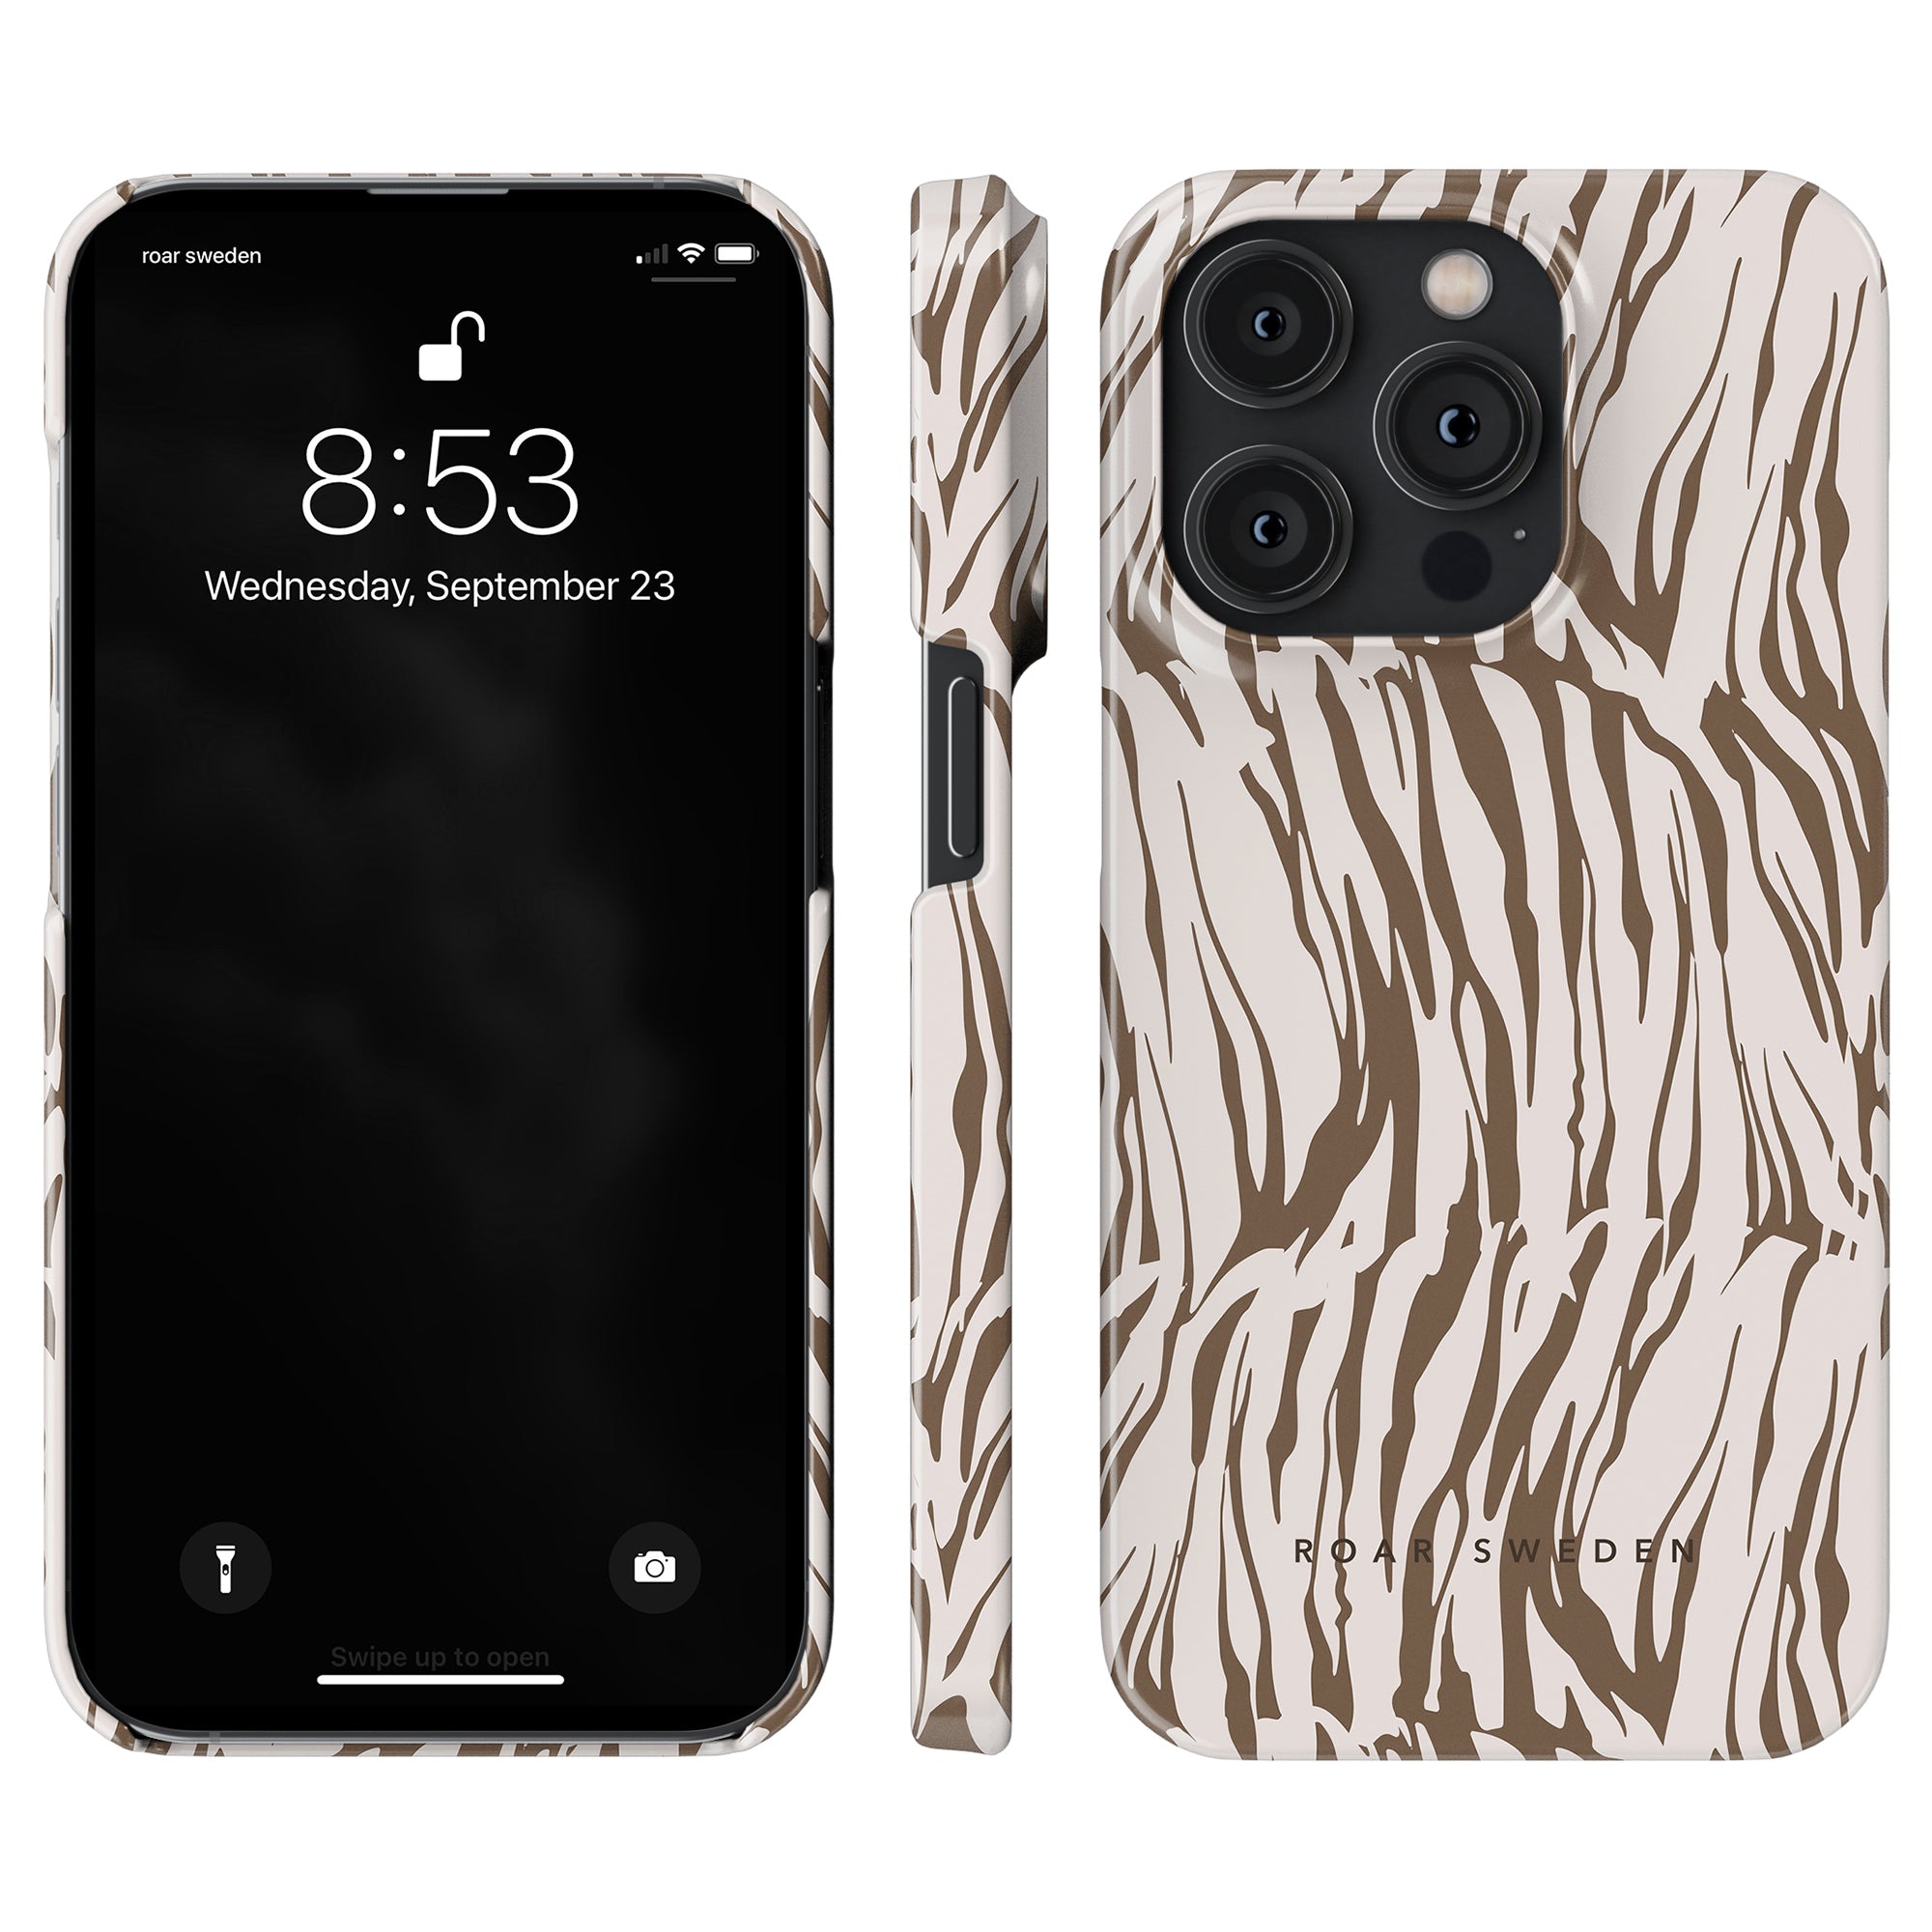 Smartphone and matching White Tiger - Slim case, perfect for adding a touch of office comfort to your ergonomic chair experience.